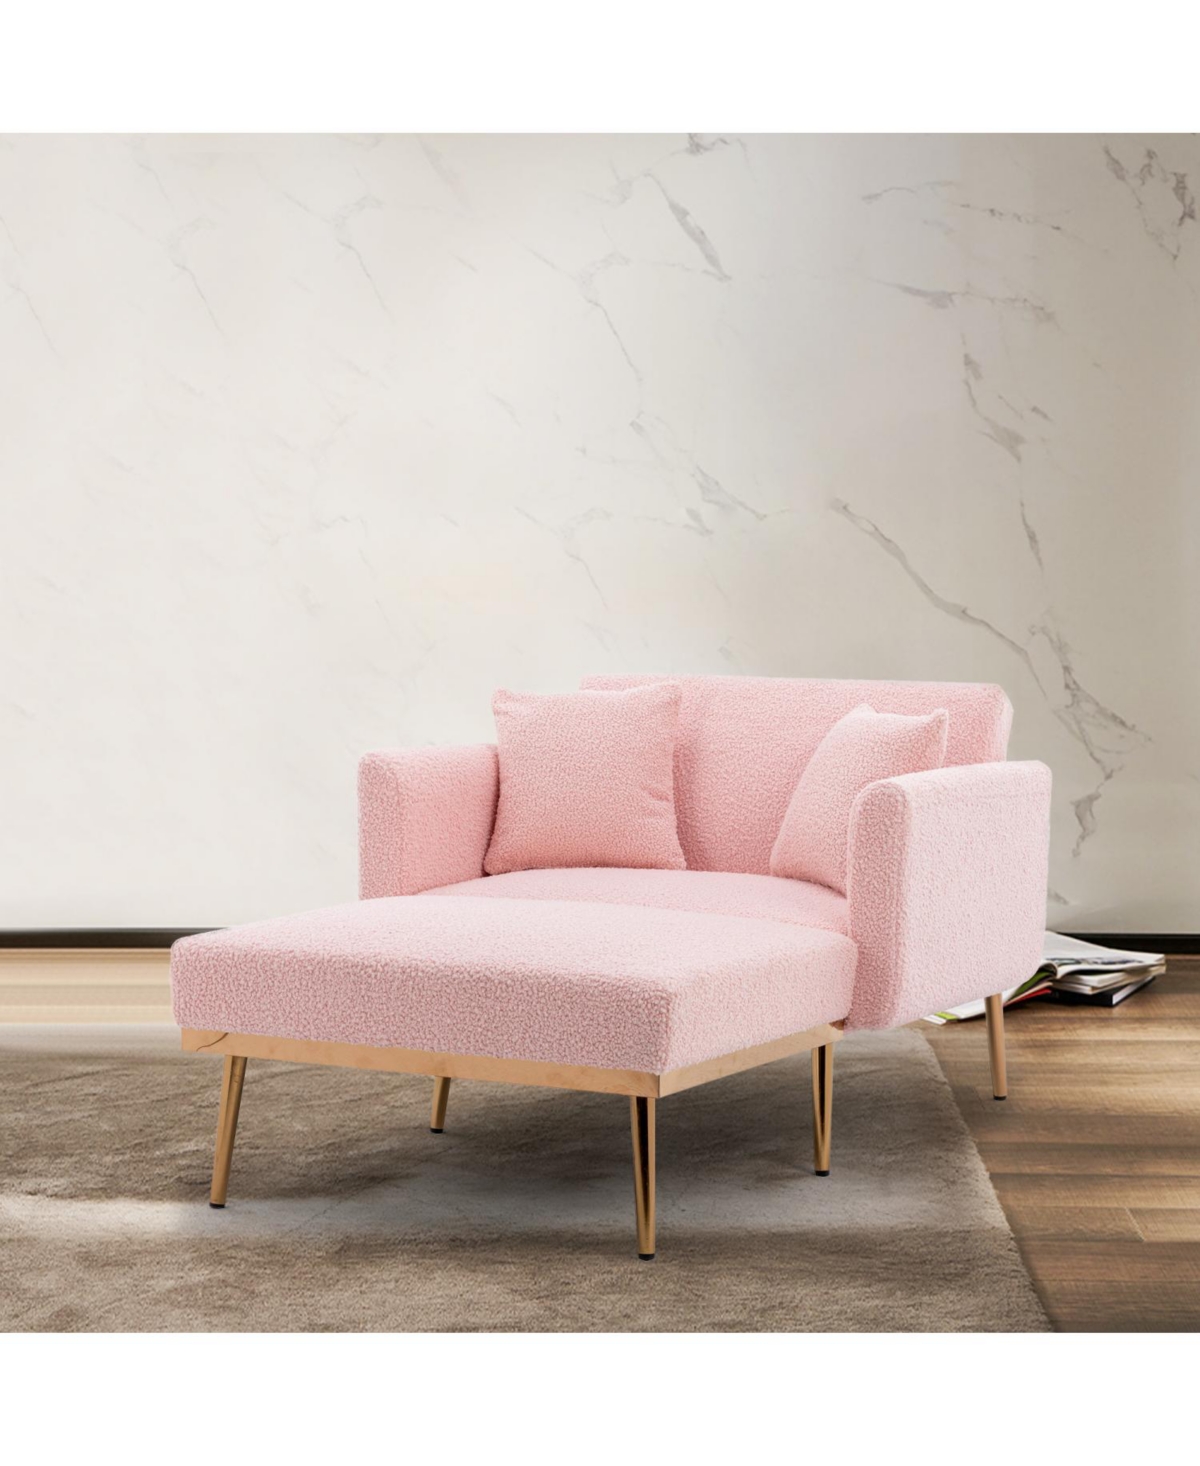 Simplie Fun Chaise Lounge Chair /accent Chair In Pink